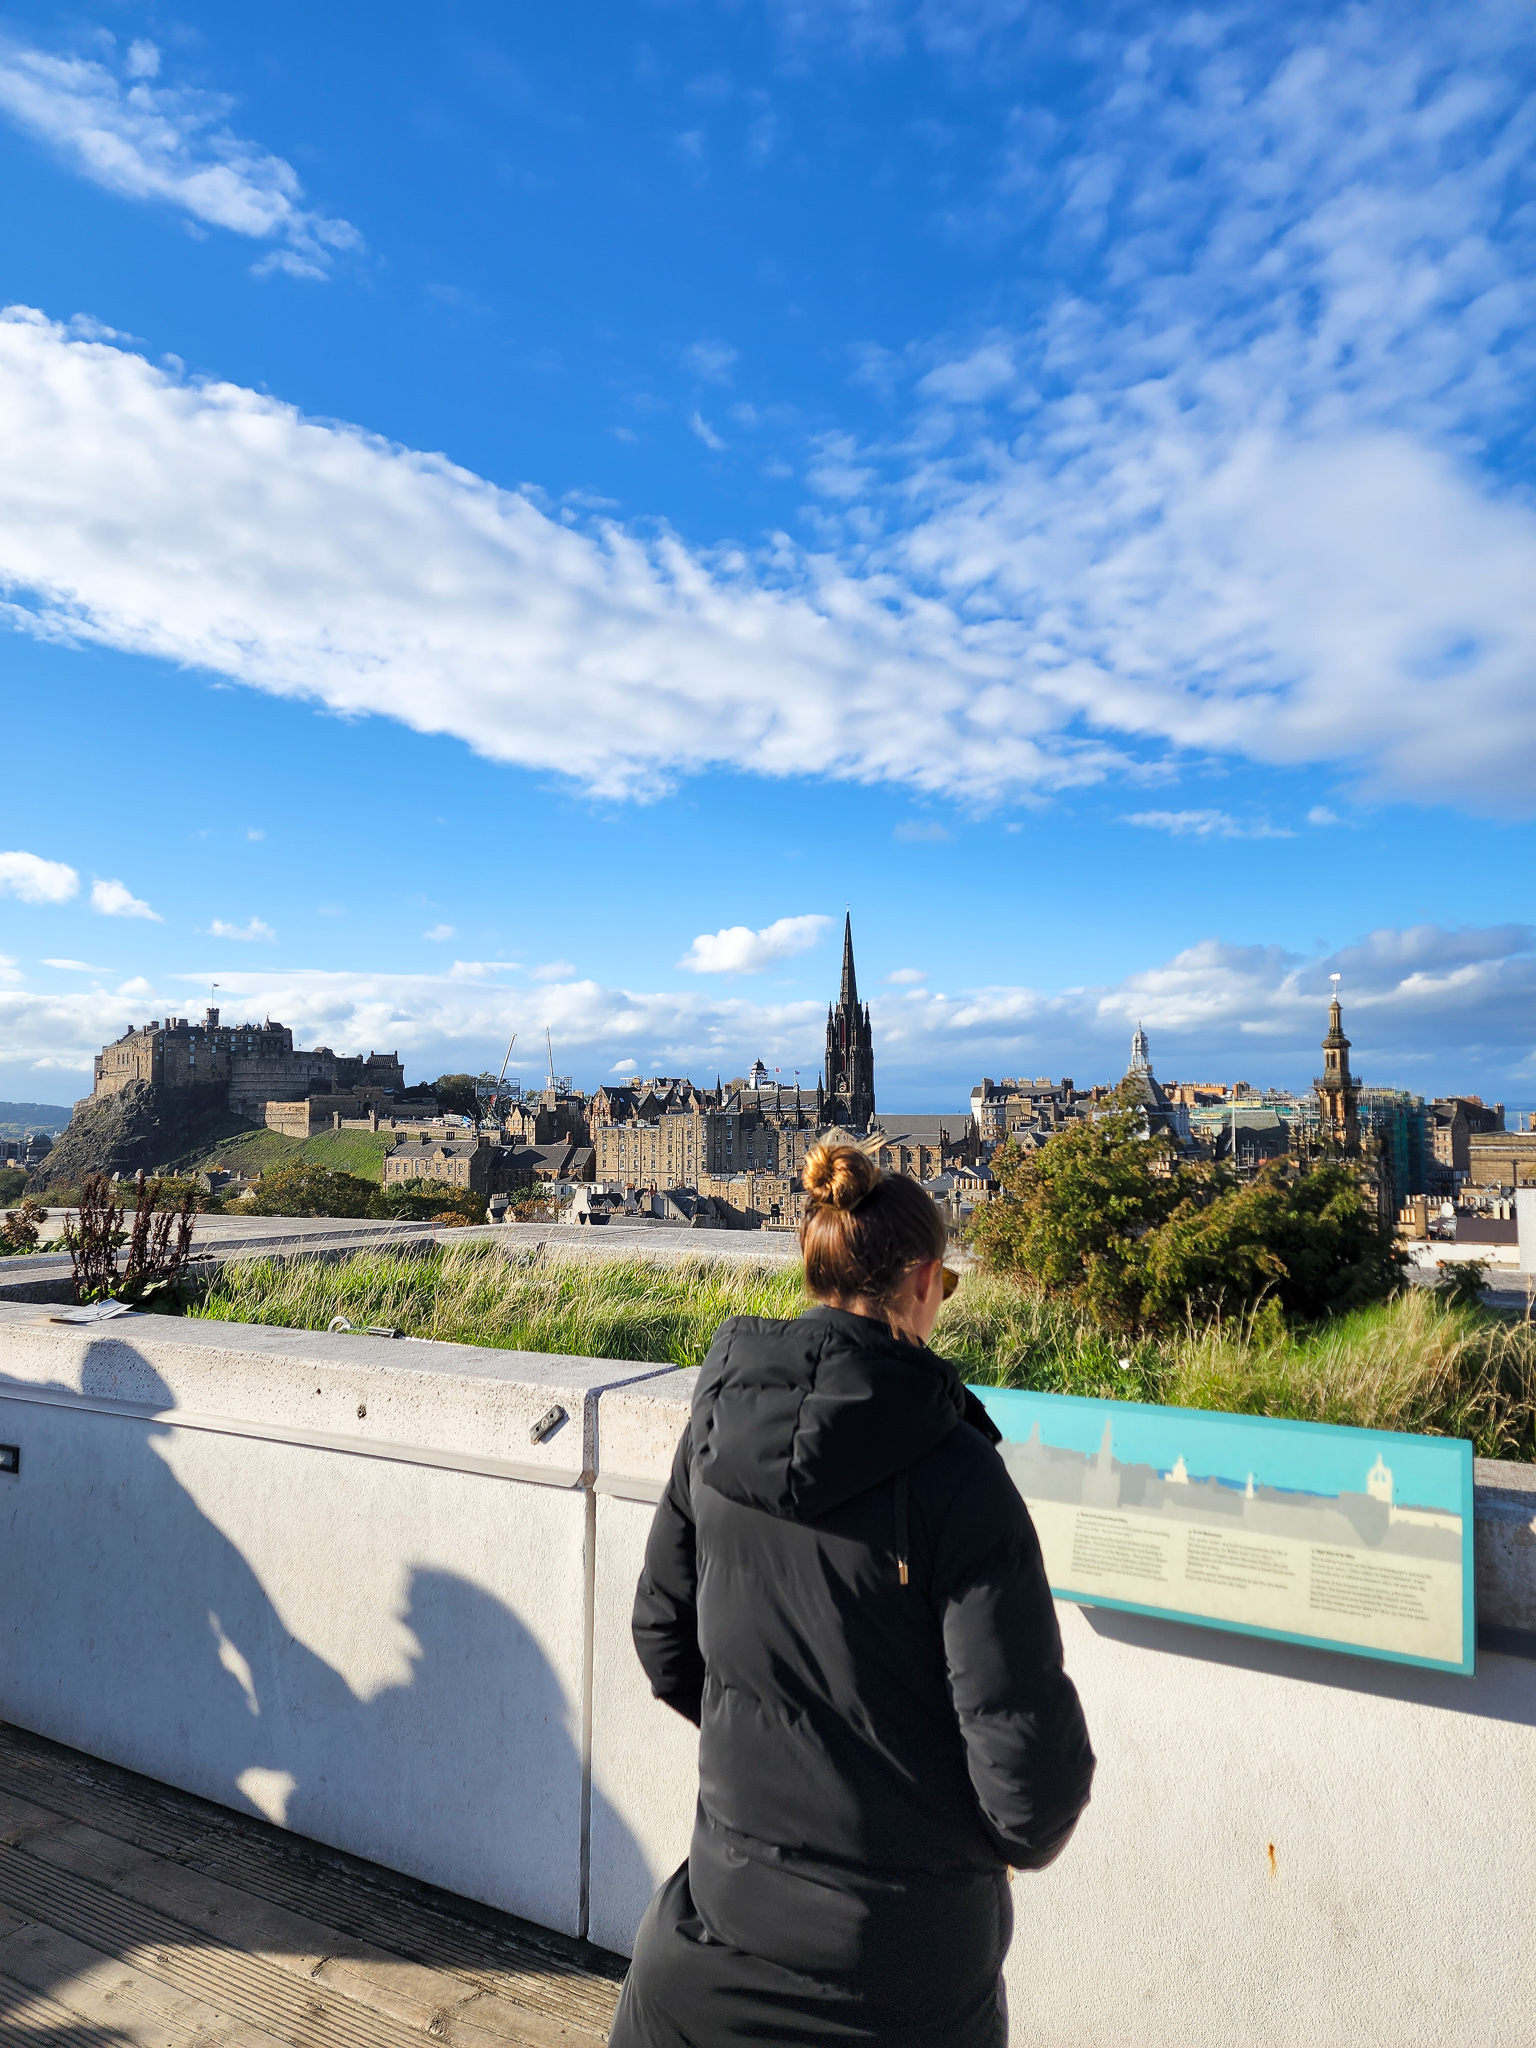 Get a dose of history at the National Scottish Museum edinburgh free view